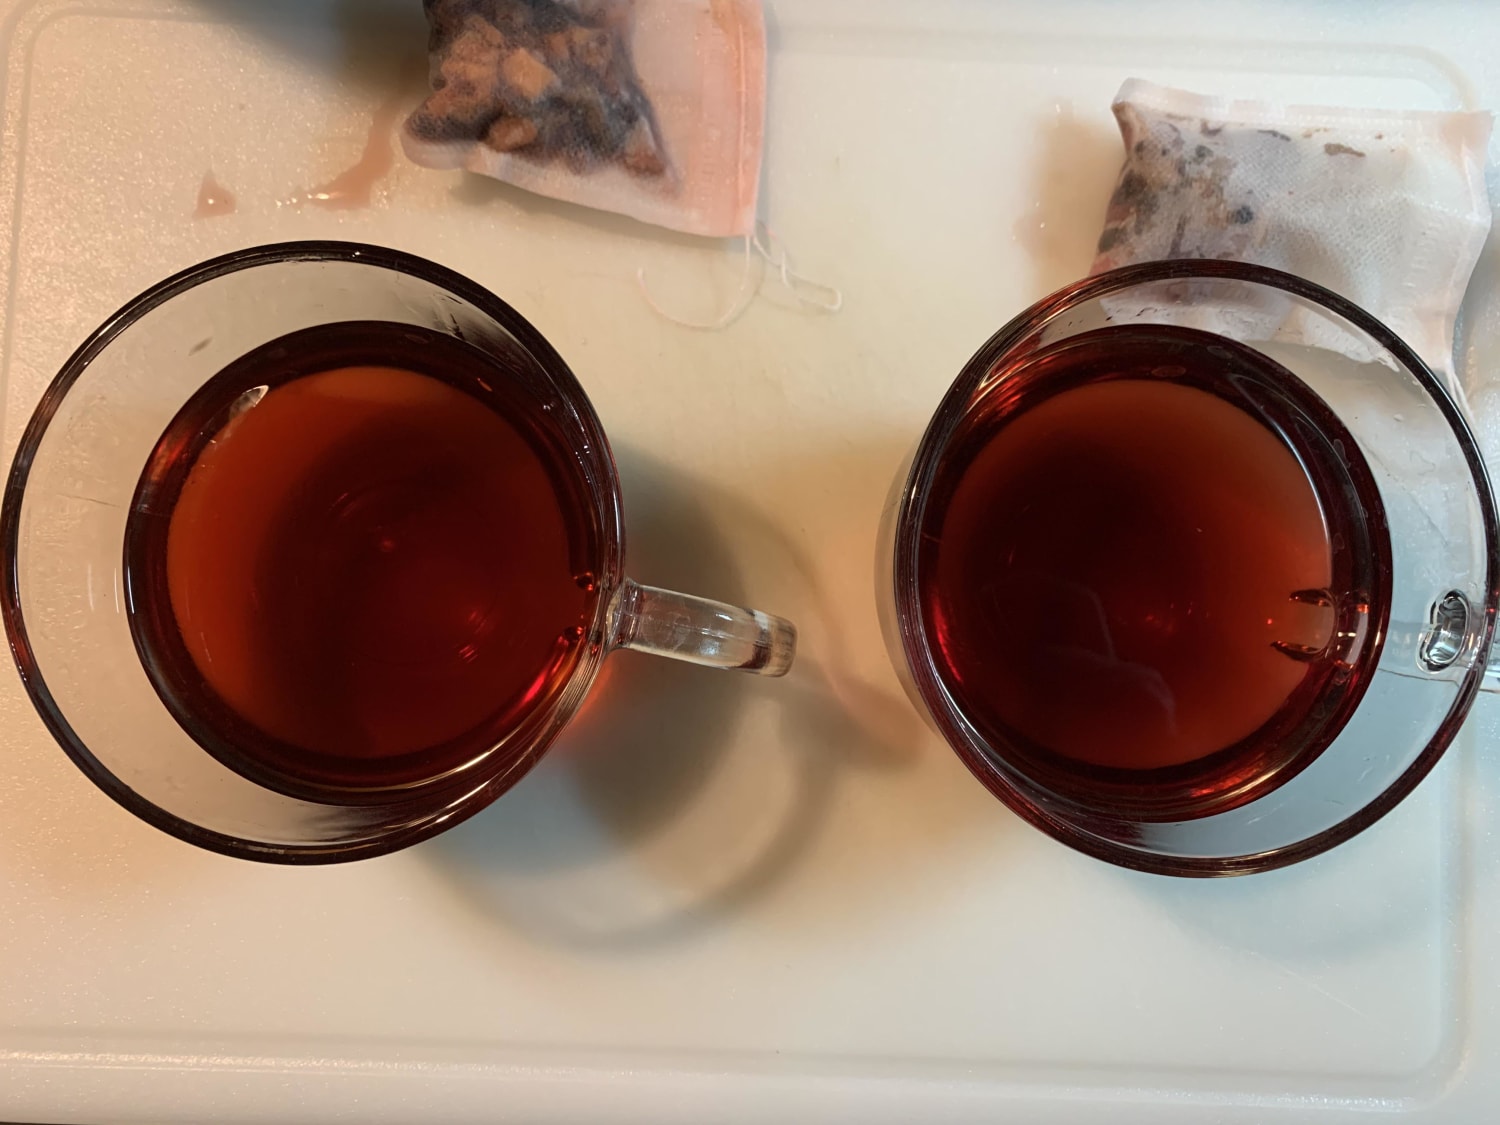 Retooling a tea flavor means trying different versions of it to get the ideal. Two different versions of a strawberry lemonade fruit tea. Taste testing is my favorite part of the day. What tea are you having today?